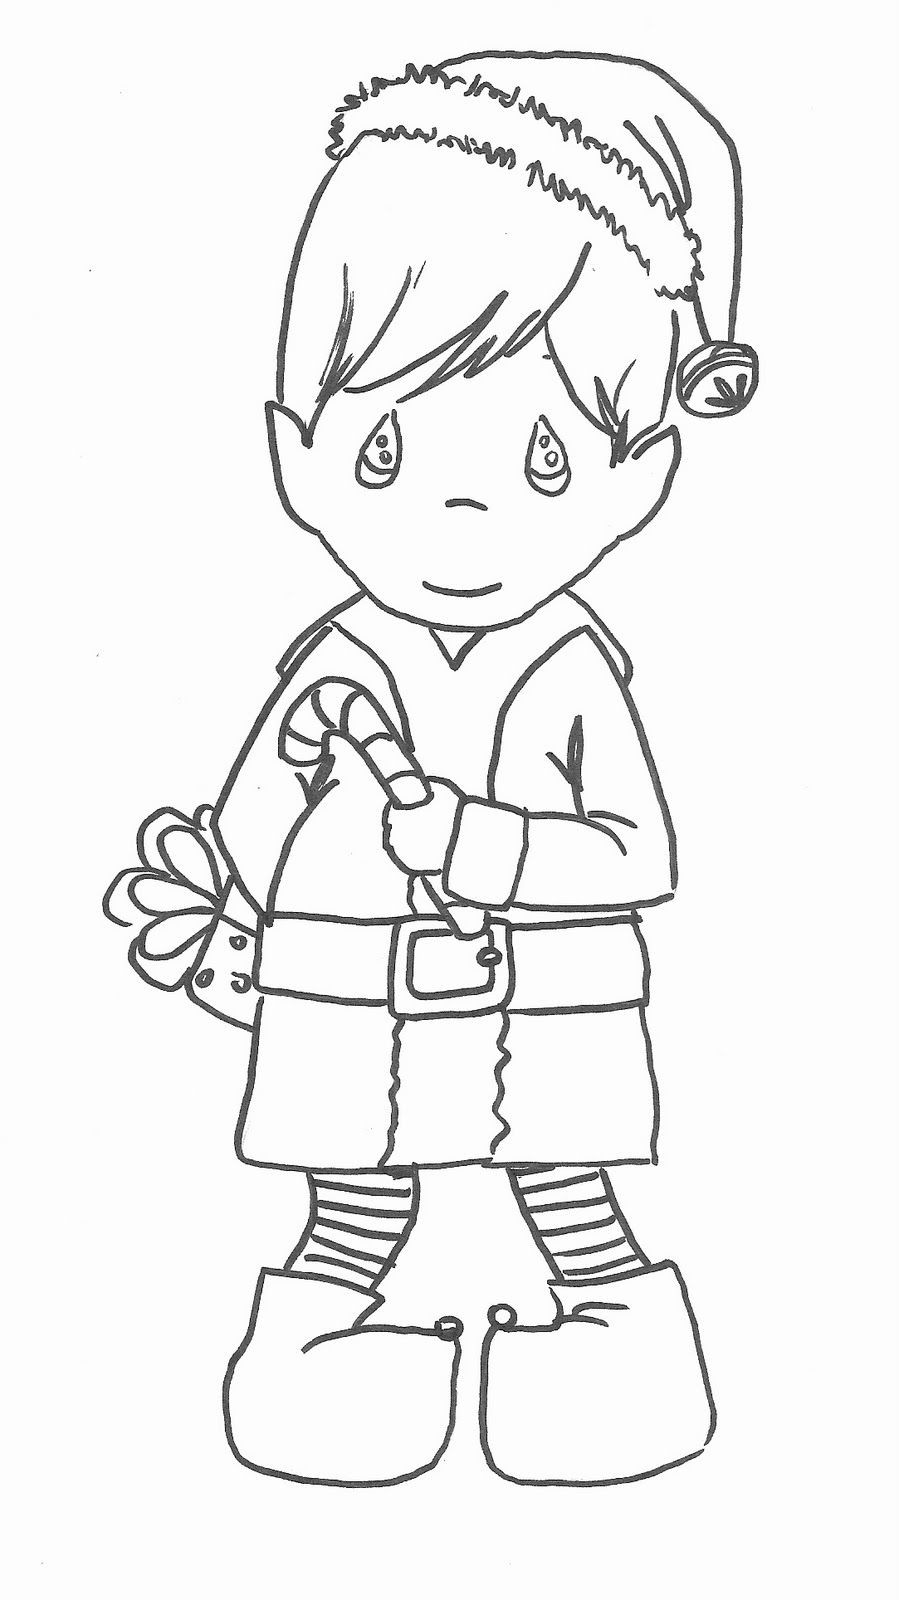 Elf Coloring Pages For Boys
 precious moments boy elf coloring pages